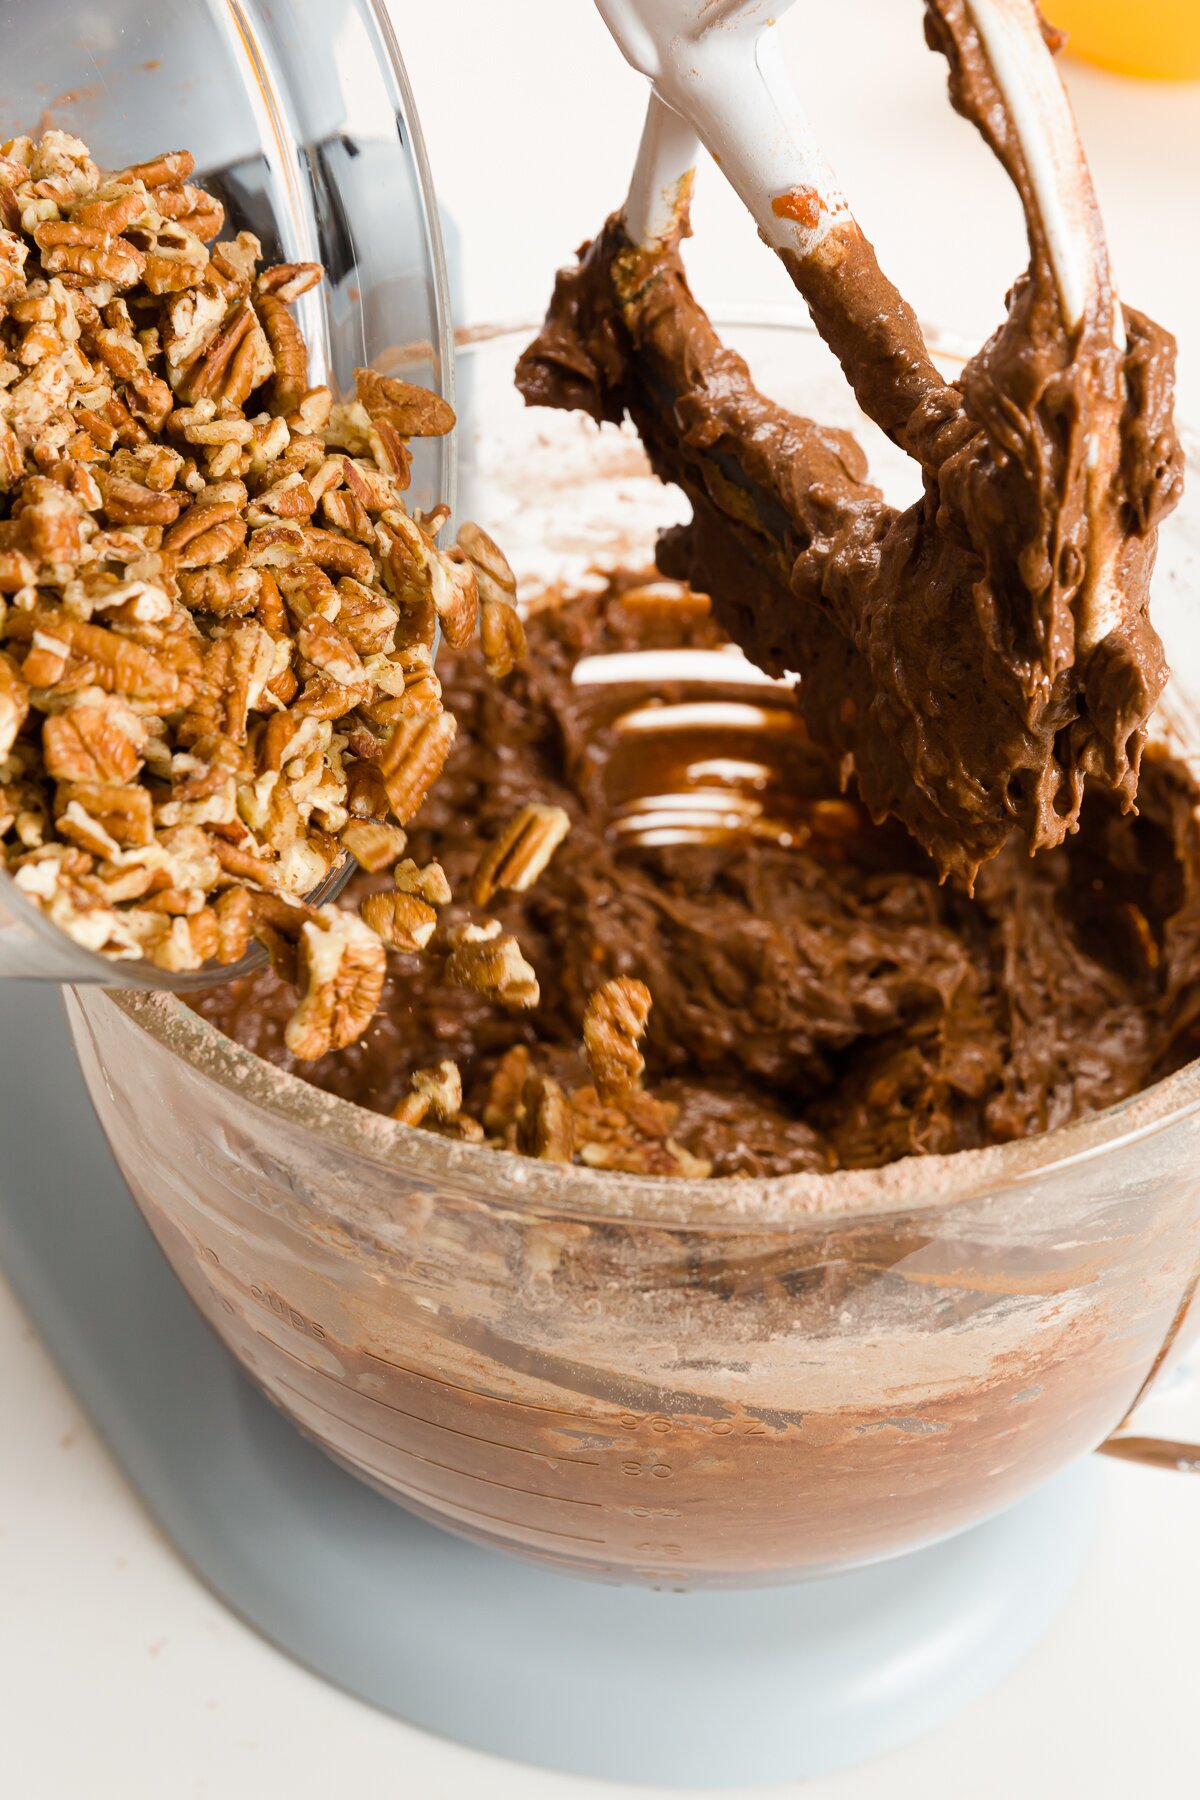 Pour chopped pecans into the bowl of a stand mixer from a glass bowl